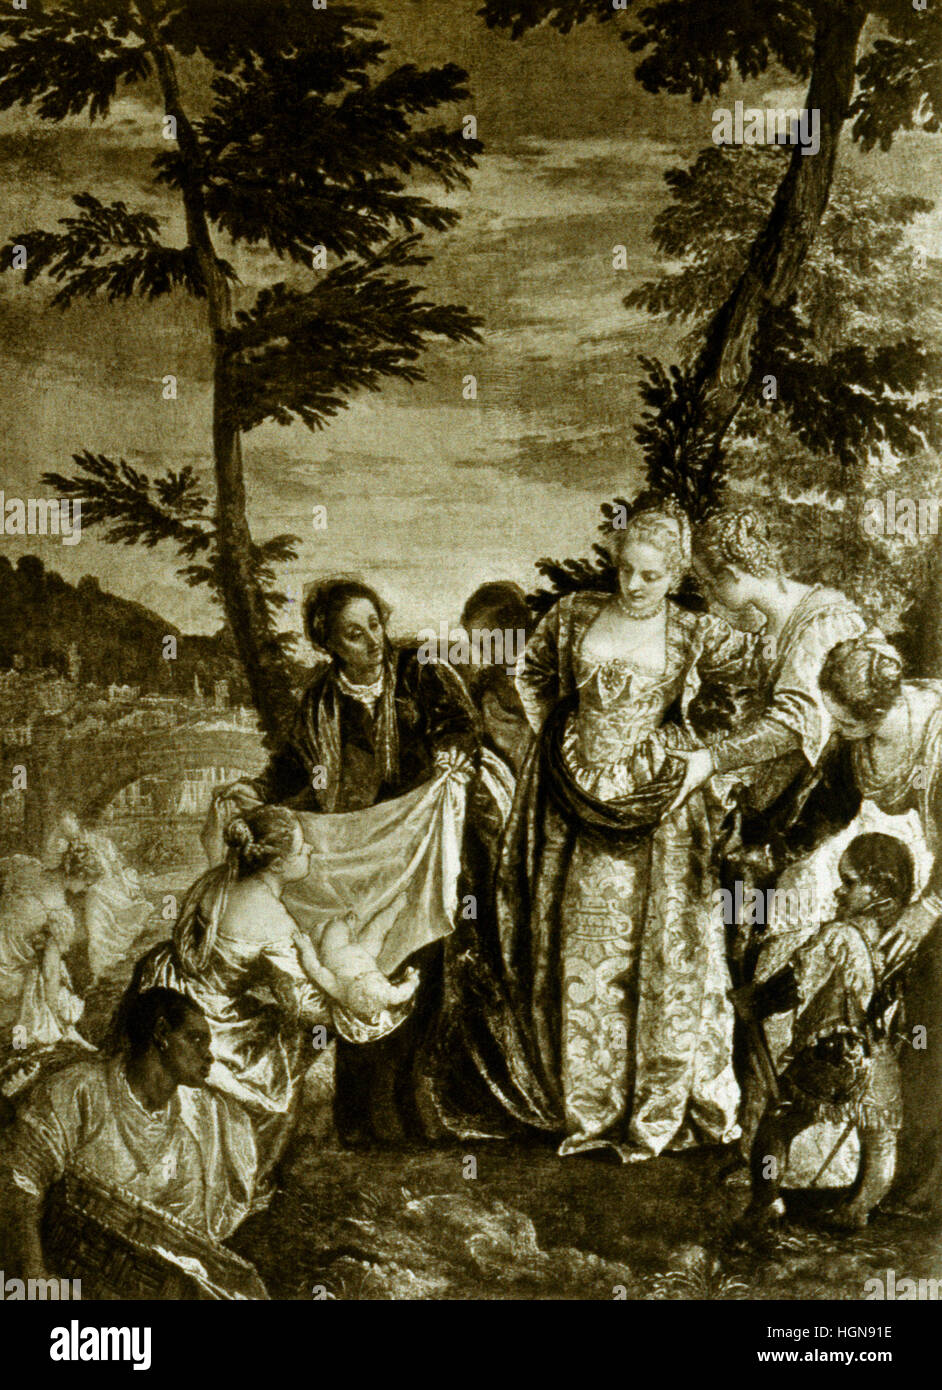 Illustration Of The Pharoah's Daughter Finding Baby Moses Paolo Caliari (Paolo Veronese) 1528-1588 Stock Photo